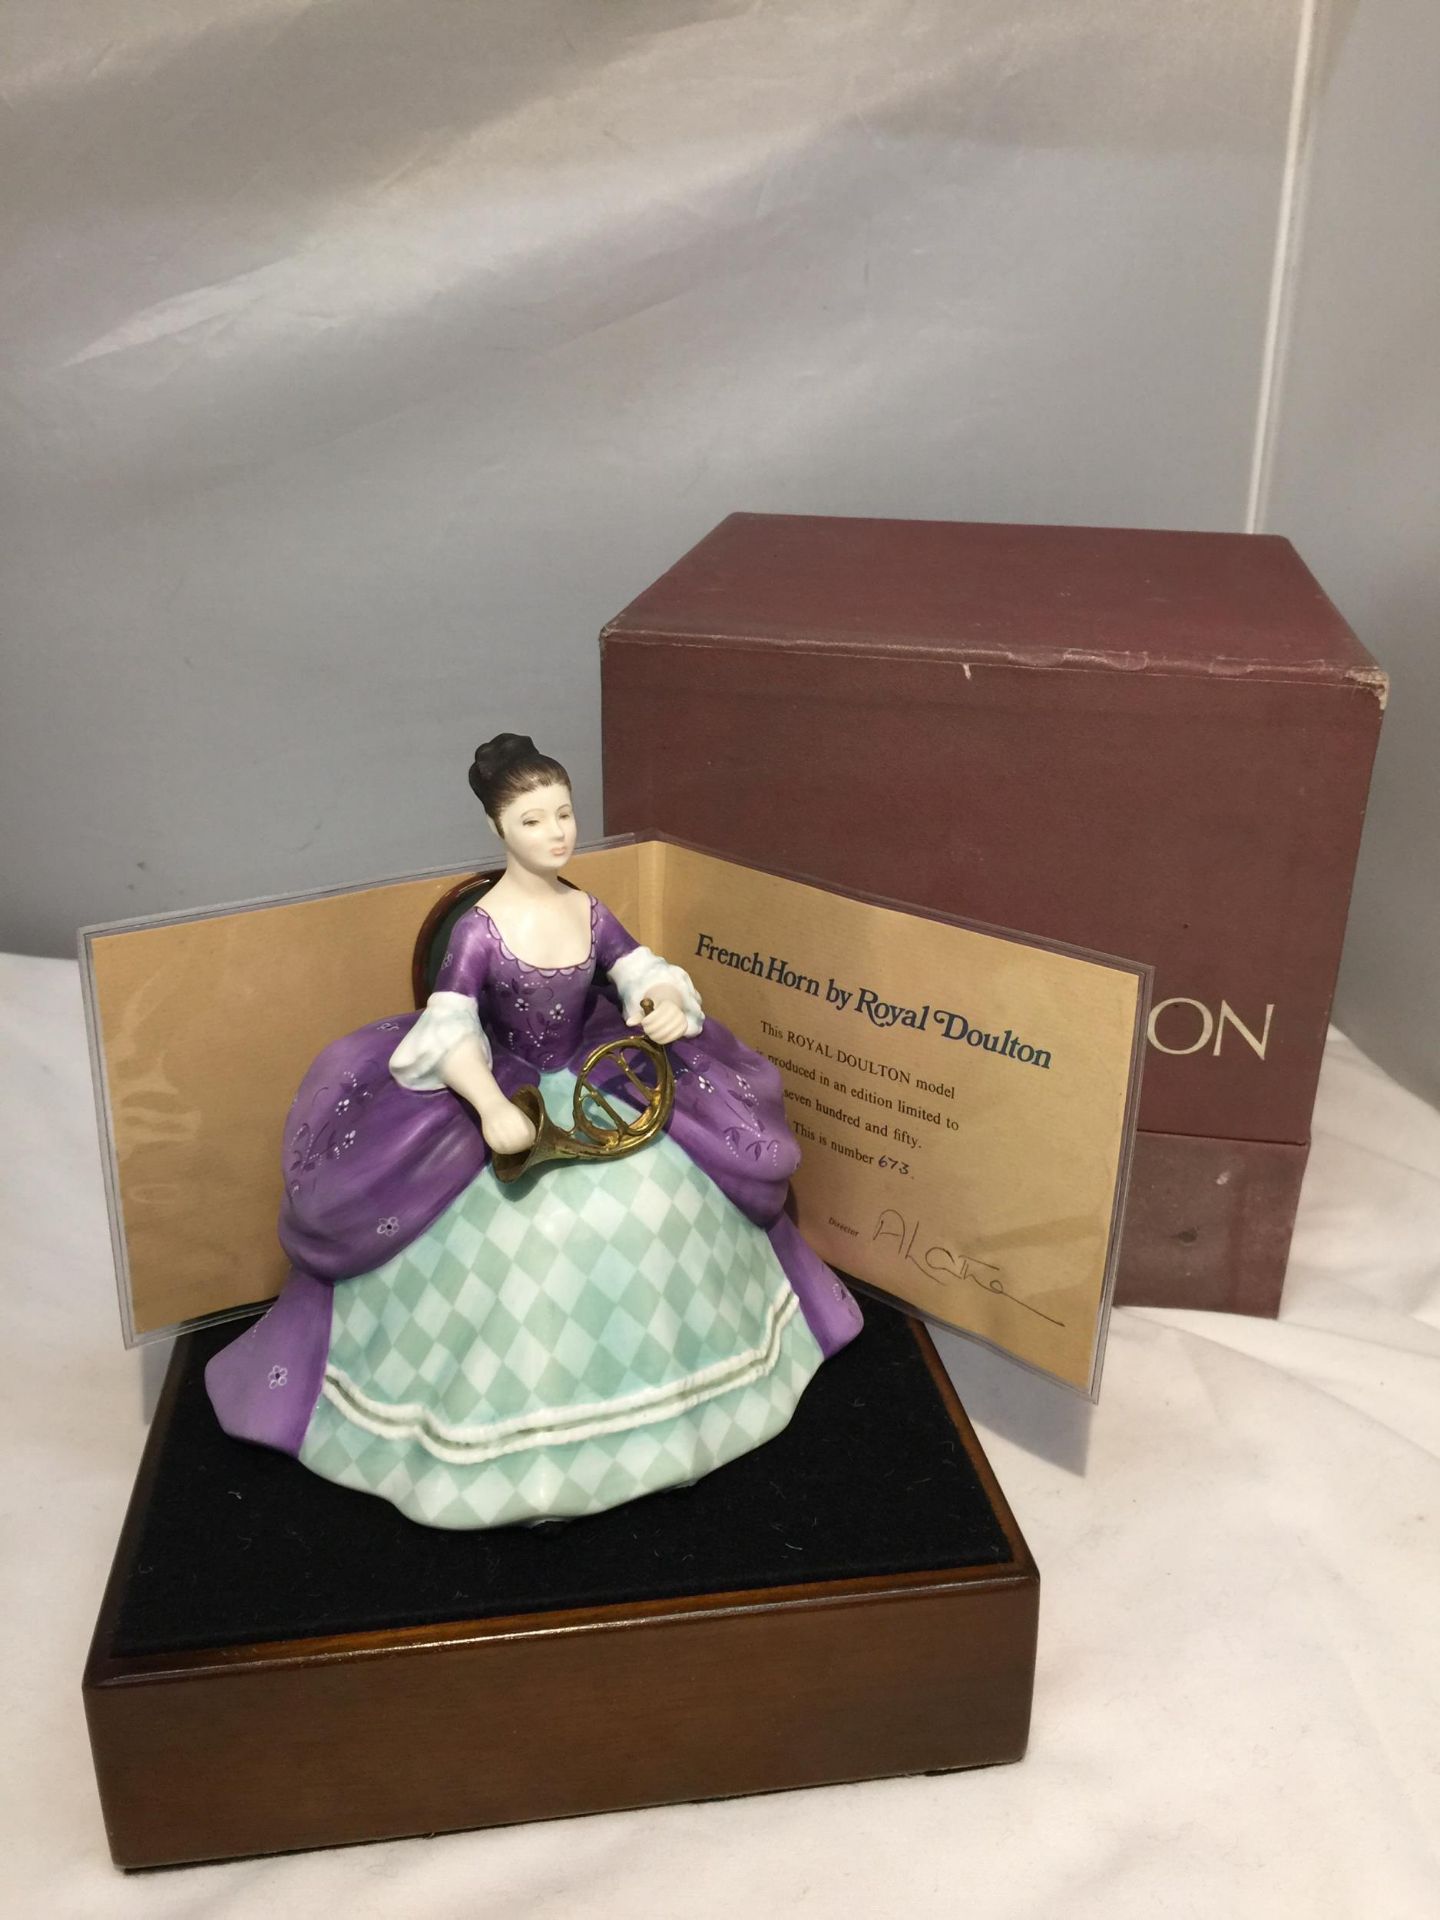 A ROYAL DOULTON FIGURINE, FRENCH HORN HN2795, MODELLED BY PEGGY DAVIES AS PART OF THE LADY MUSICIANS